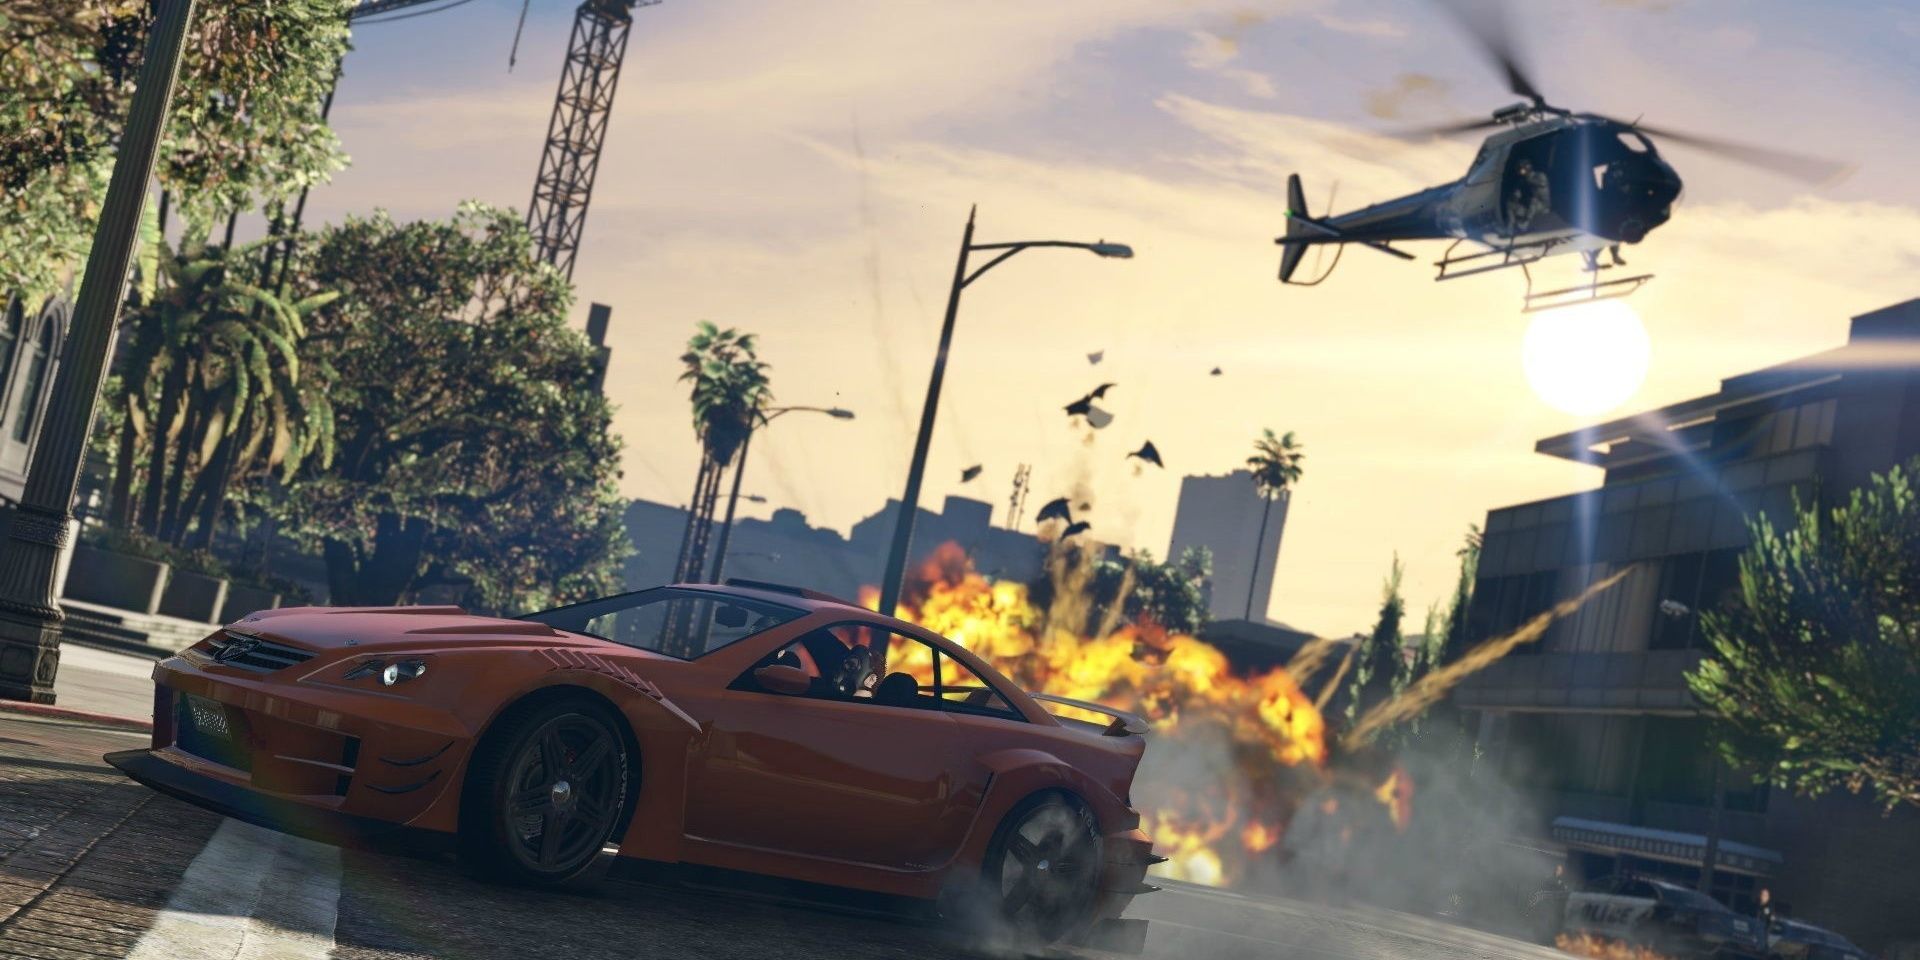 GTAV explosions and car turning on street with chopper above